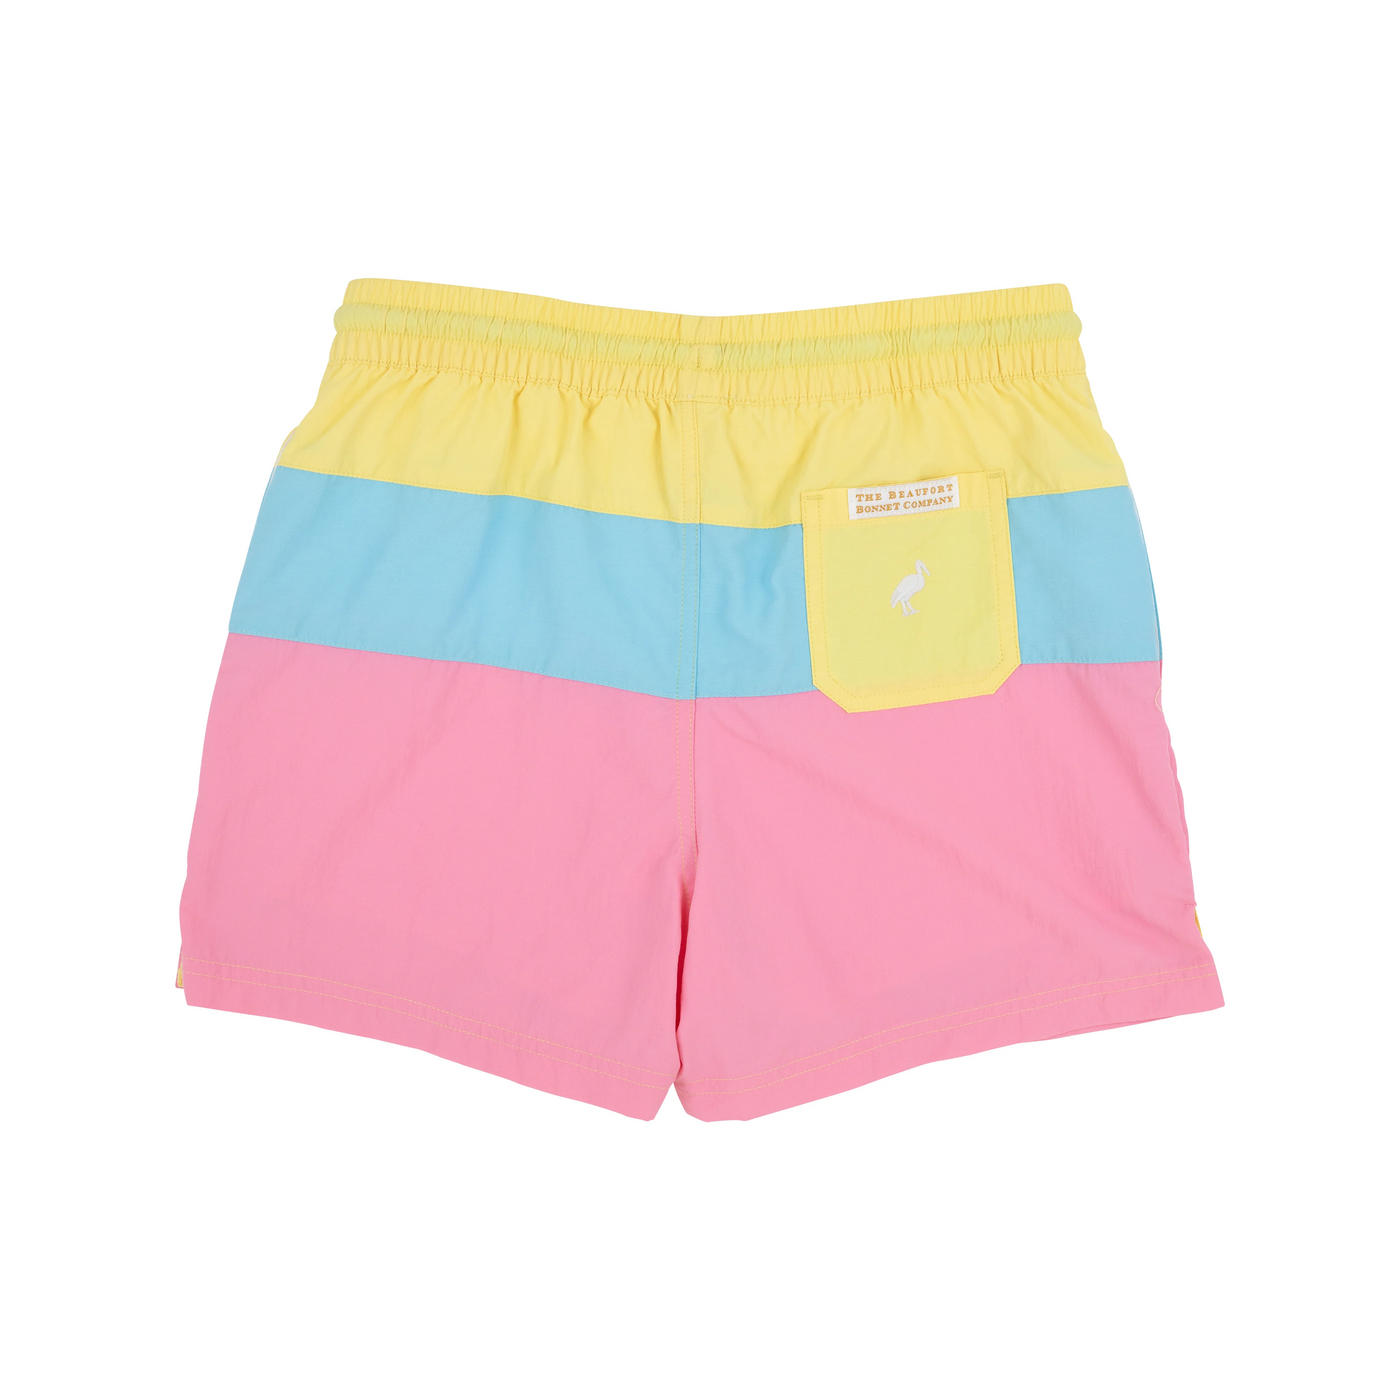 Country Club  Colorblock Trunks - Lake Worth Yellow, Brookline Blue, & Hamptons Hot Pink With Worth Avenue White